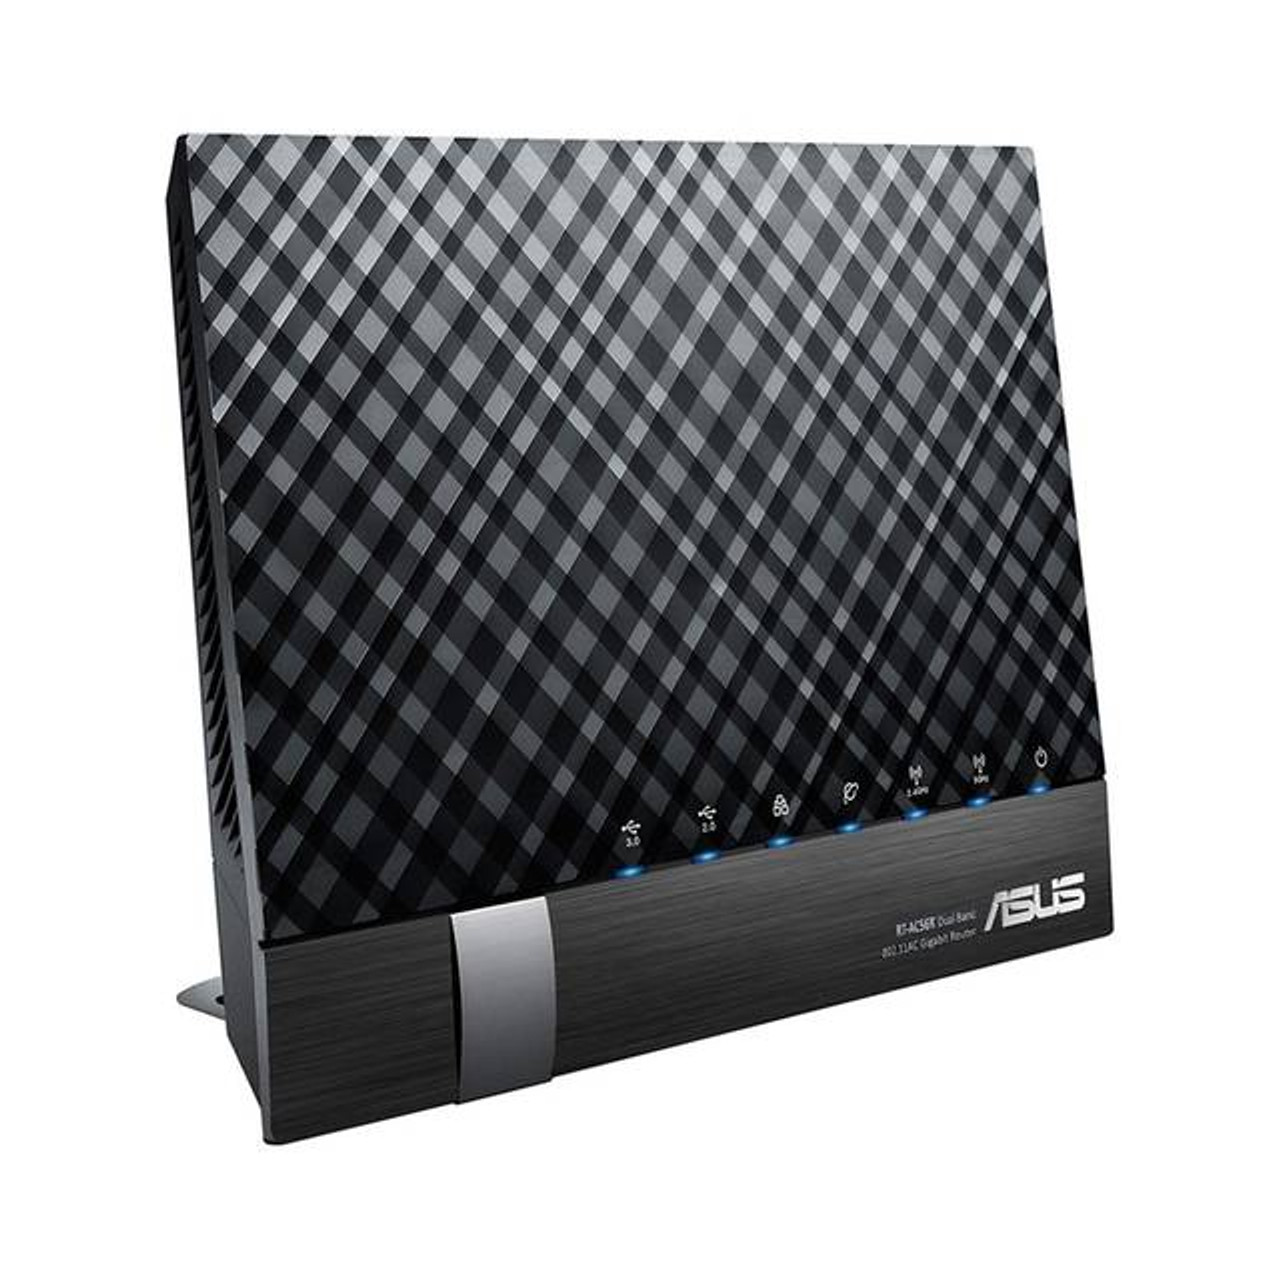 Asus RT-AC56R 802.11ac Dual-Band Wireless-AC1200 Gigabit Router